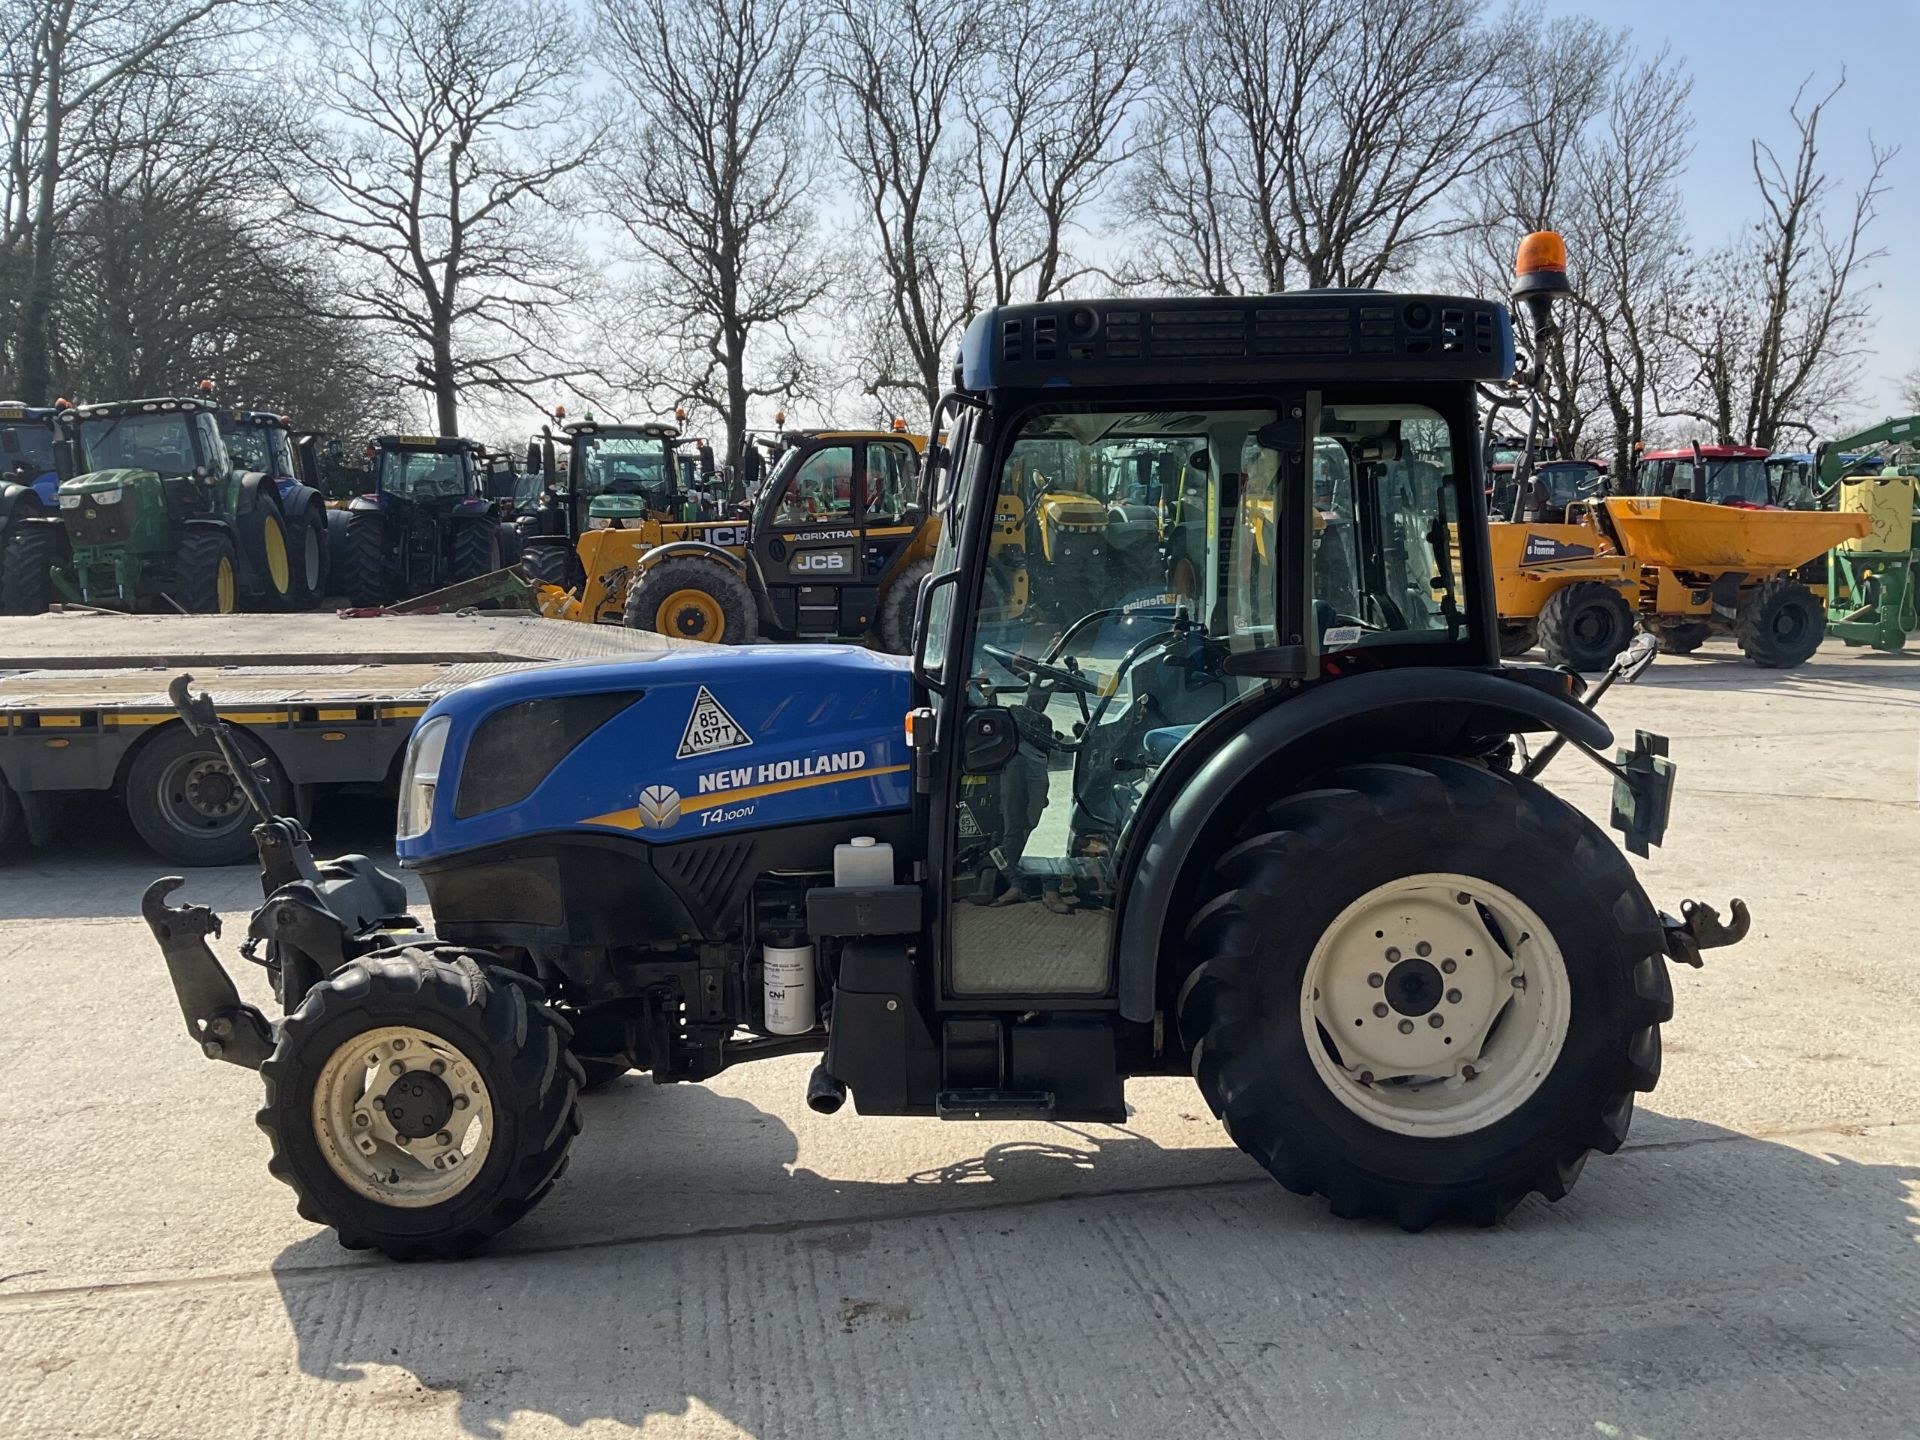 YEAR 2018 NEW HOLLAND T4.100 N